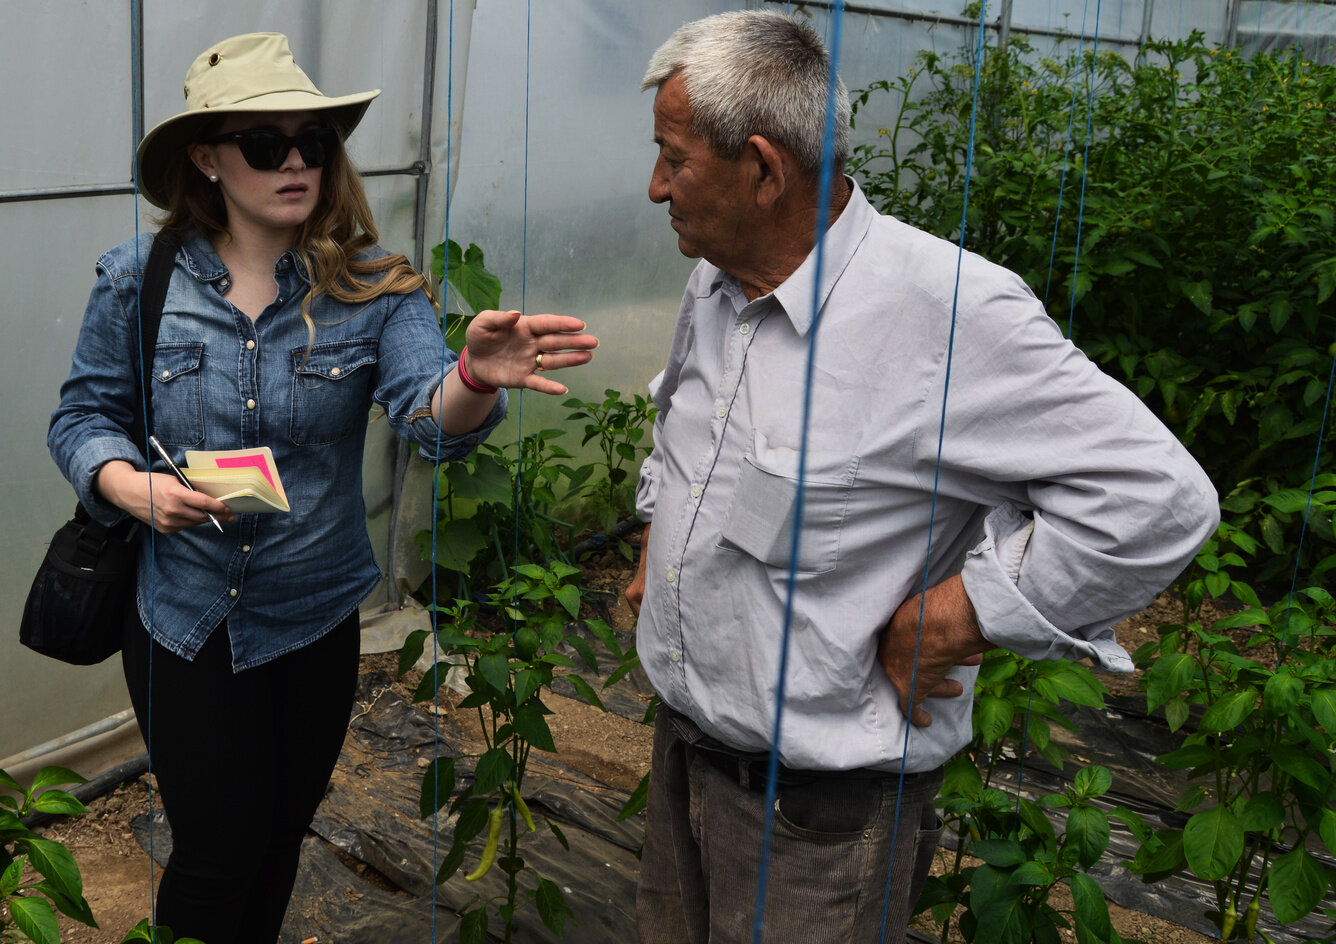 The photographer interviews a Kosovar Serb farmer in his greenhouse in Klokot, a Serbian enclave.